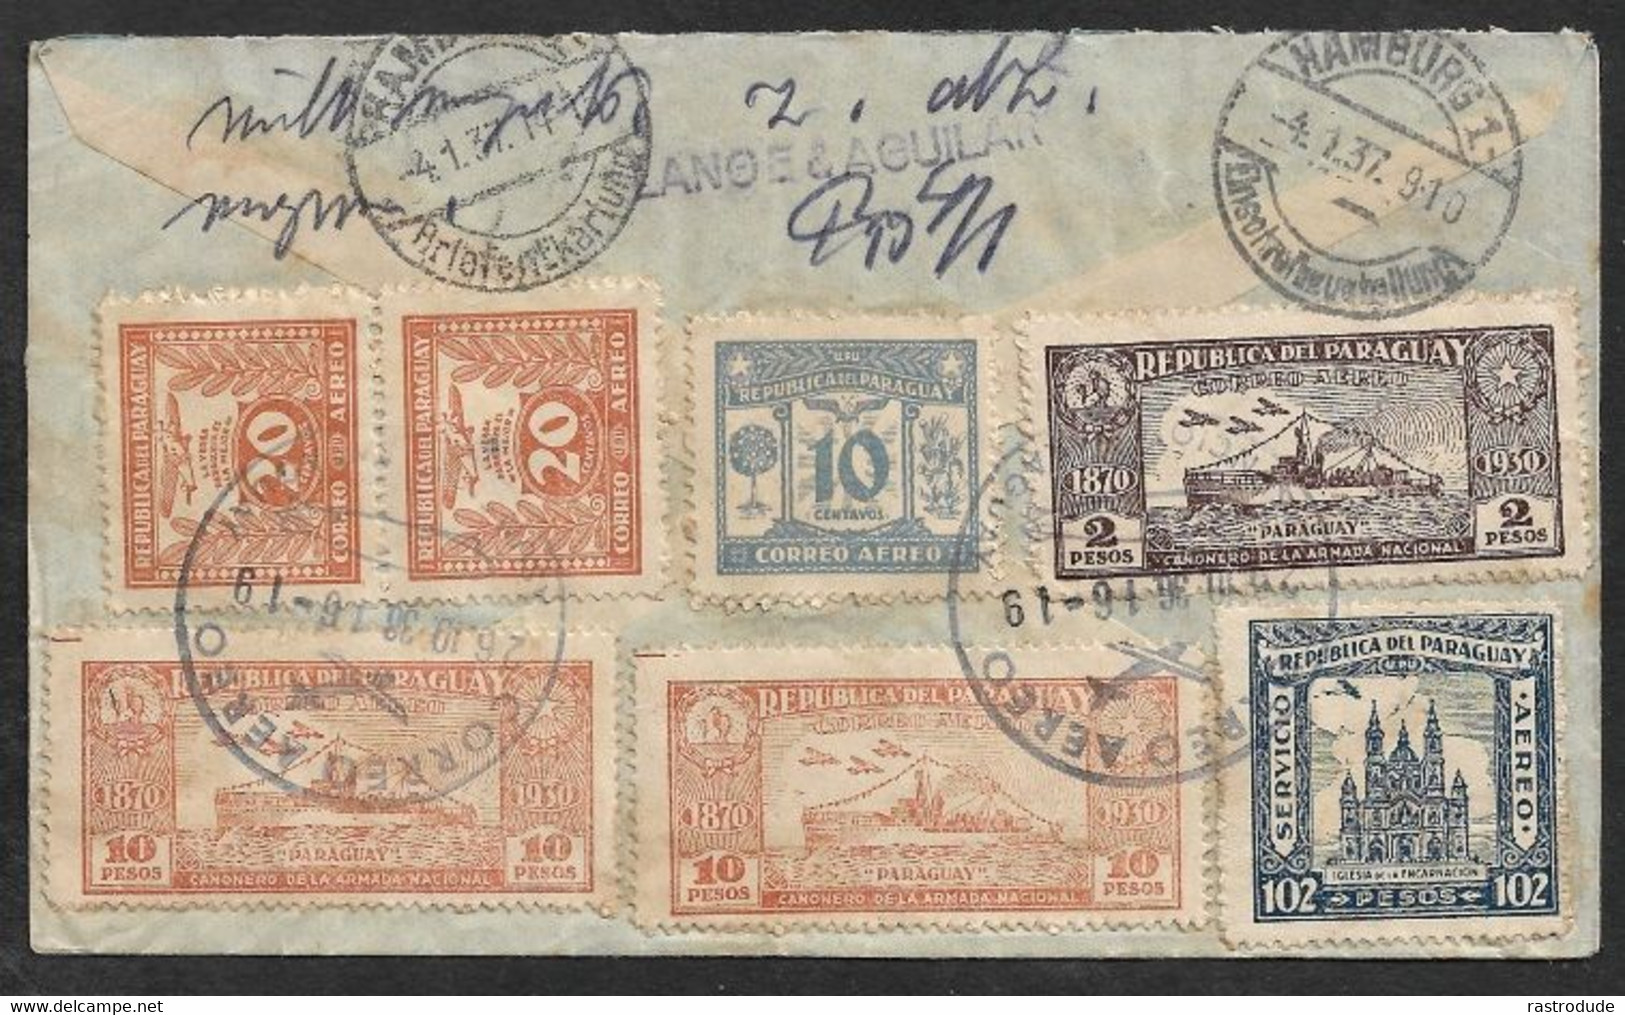 1937 PARAGUAY  - REGISTERED AIRMAIL COVER TO HAMBURG, GERMANY - VIA CONDOR - Paraguay